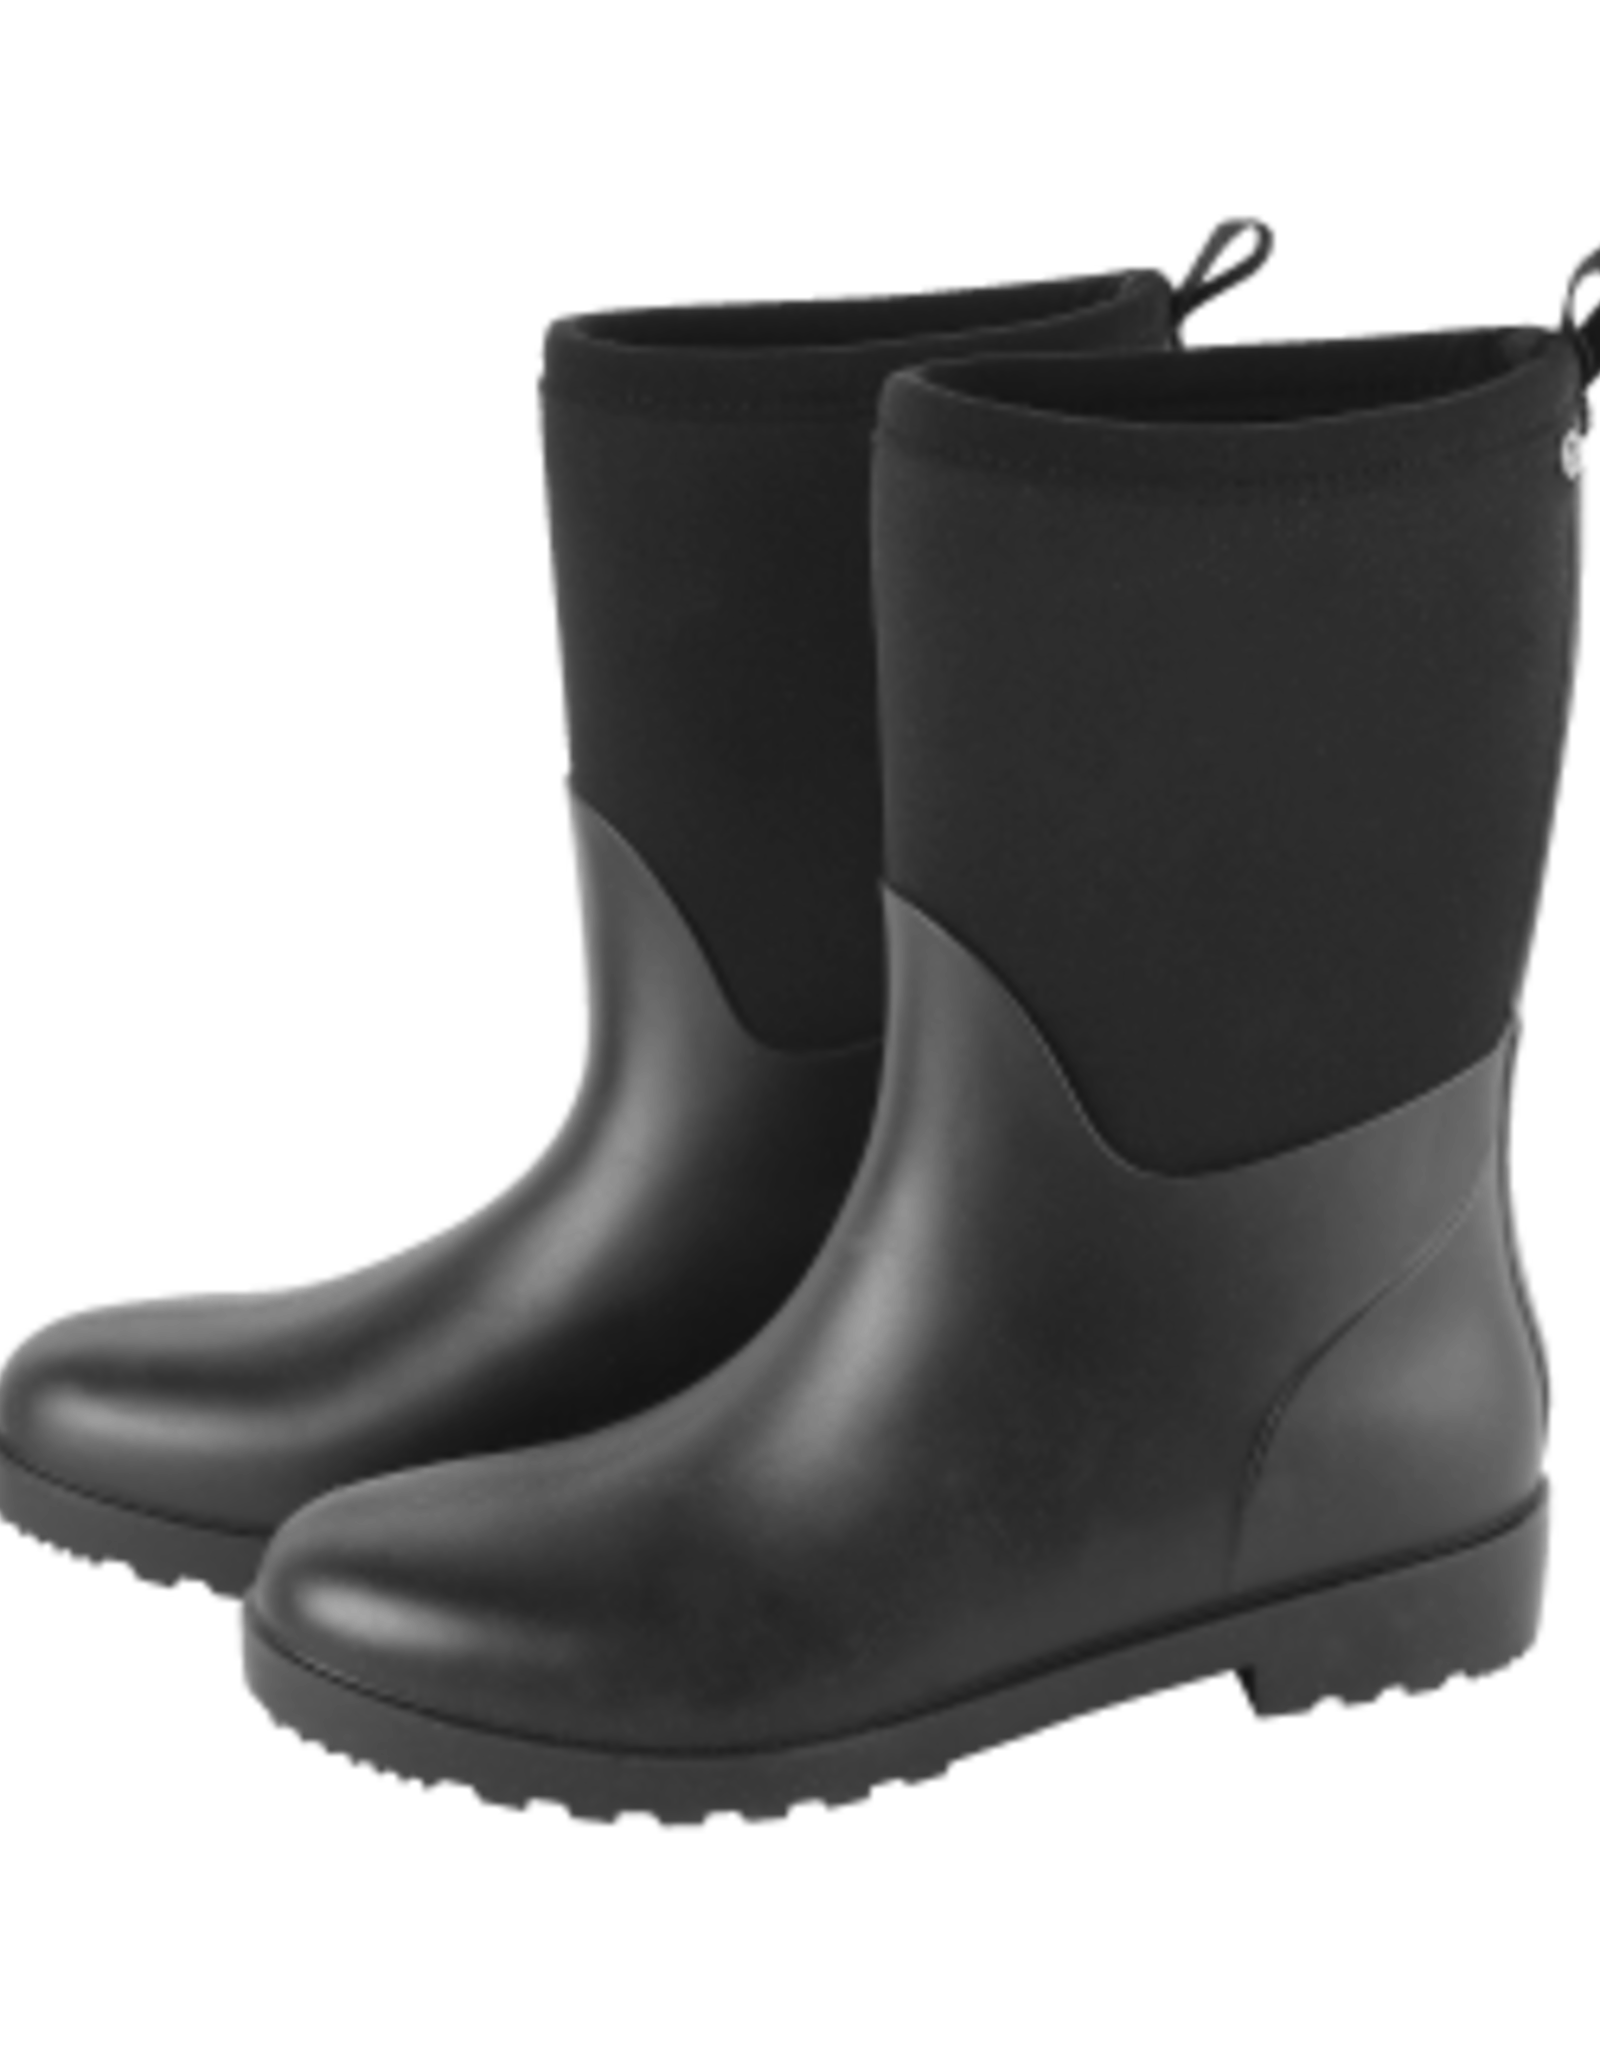 WALDHAUSEN All Weather Boot Melbourne